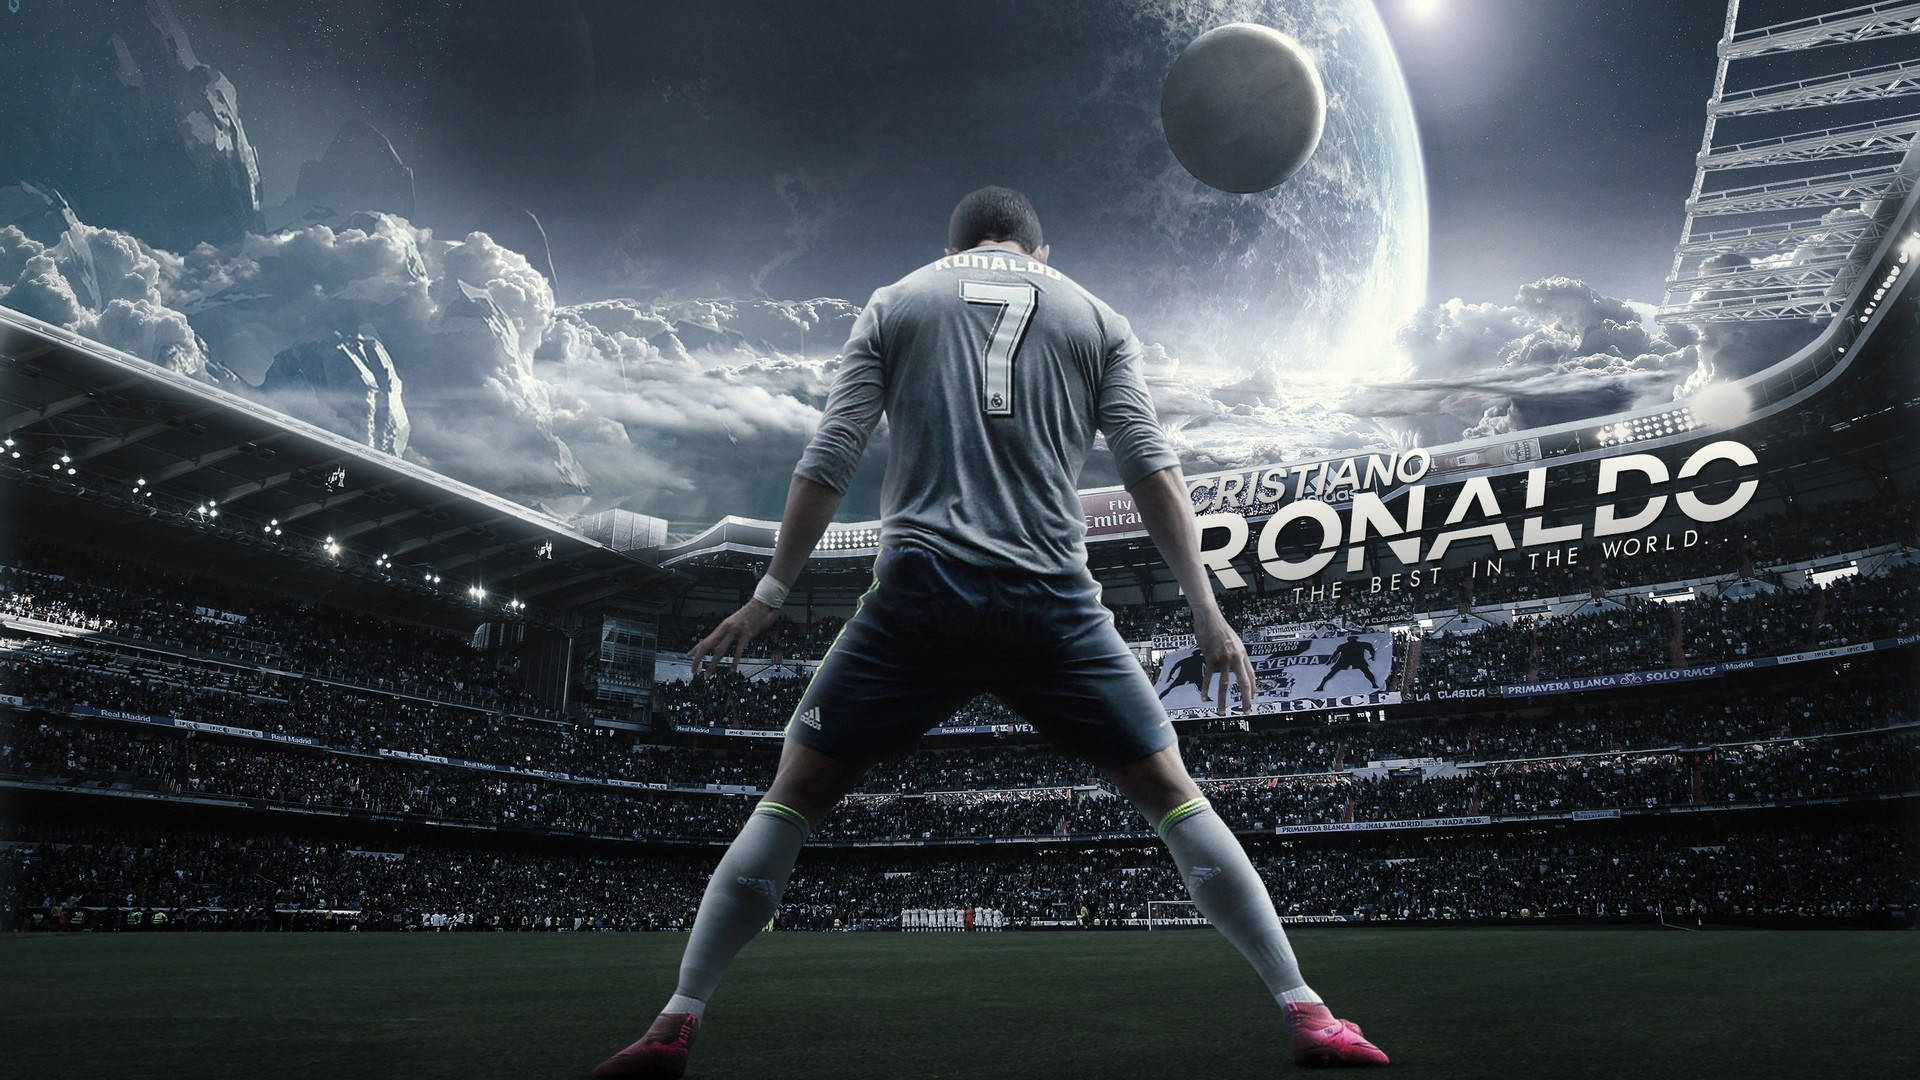 CR7 Wallpaper iPhone - KoLPaPer - Awesome Free HD Wallpapers-thanhphatduhoc.com.vn